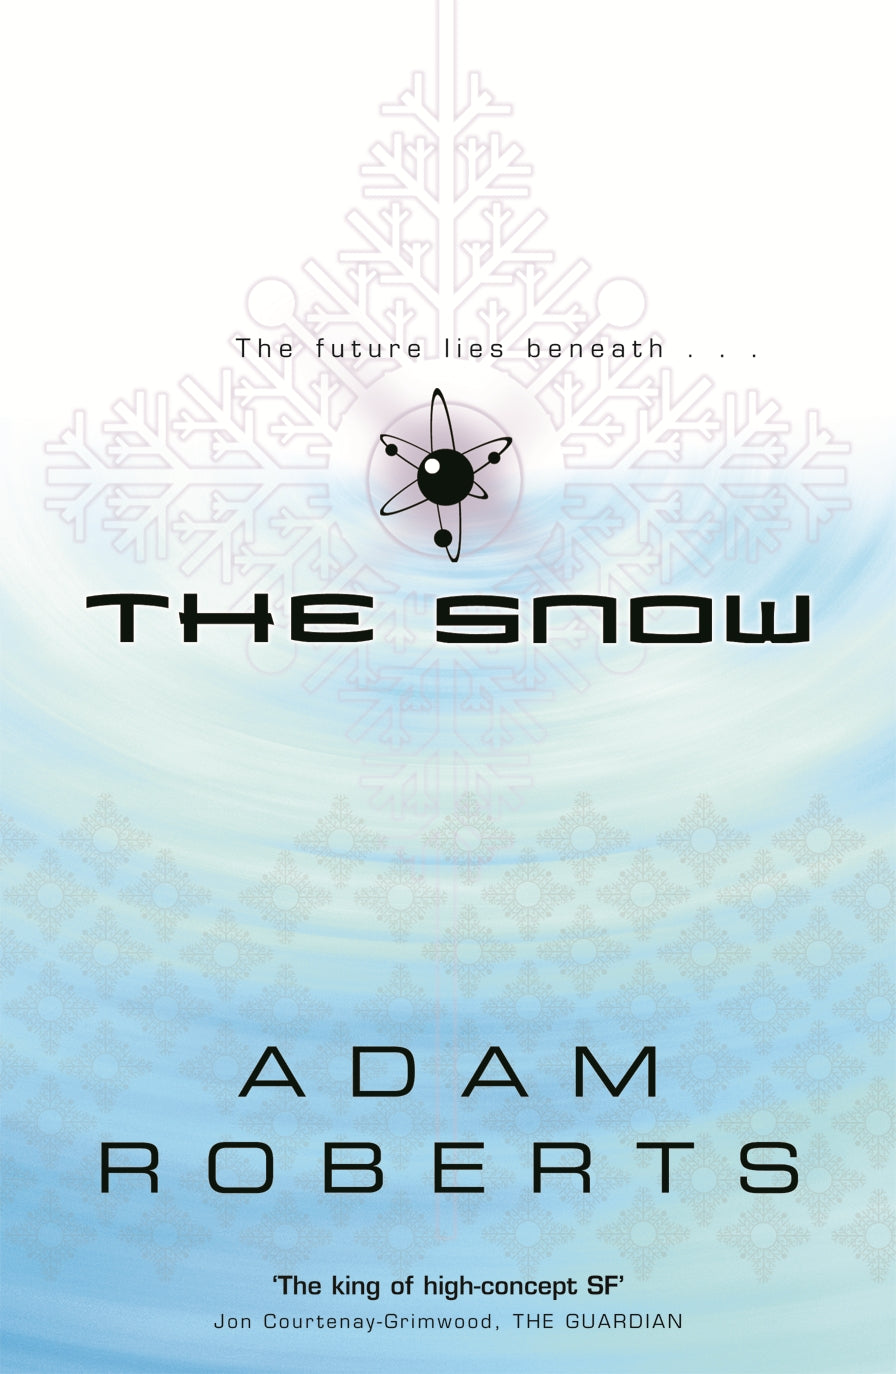 The Snow by Adam Roberts